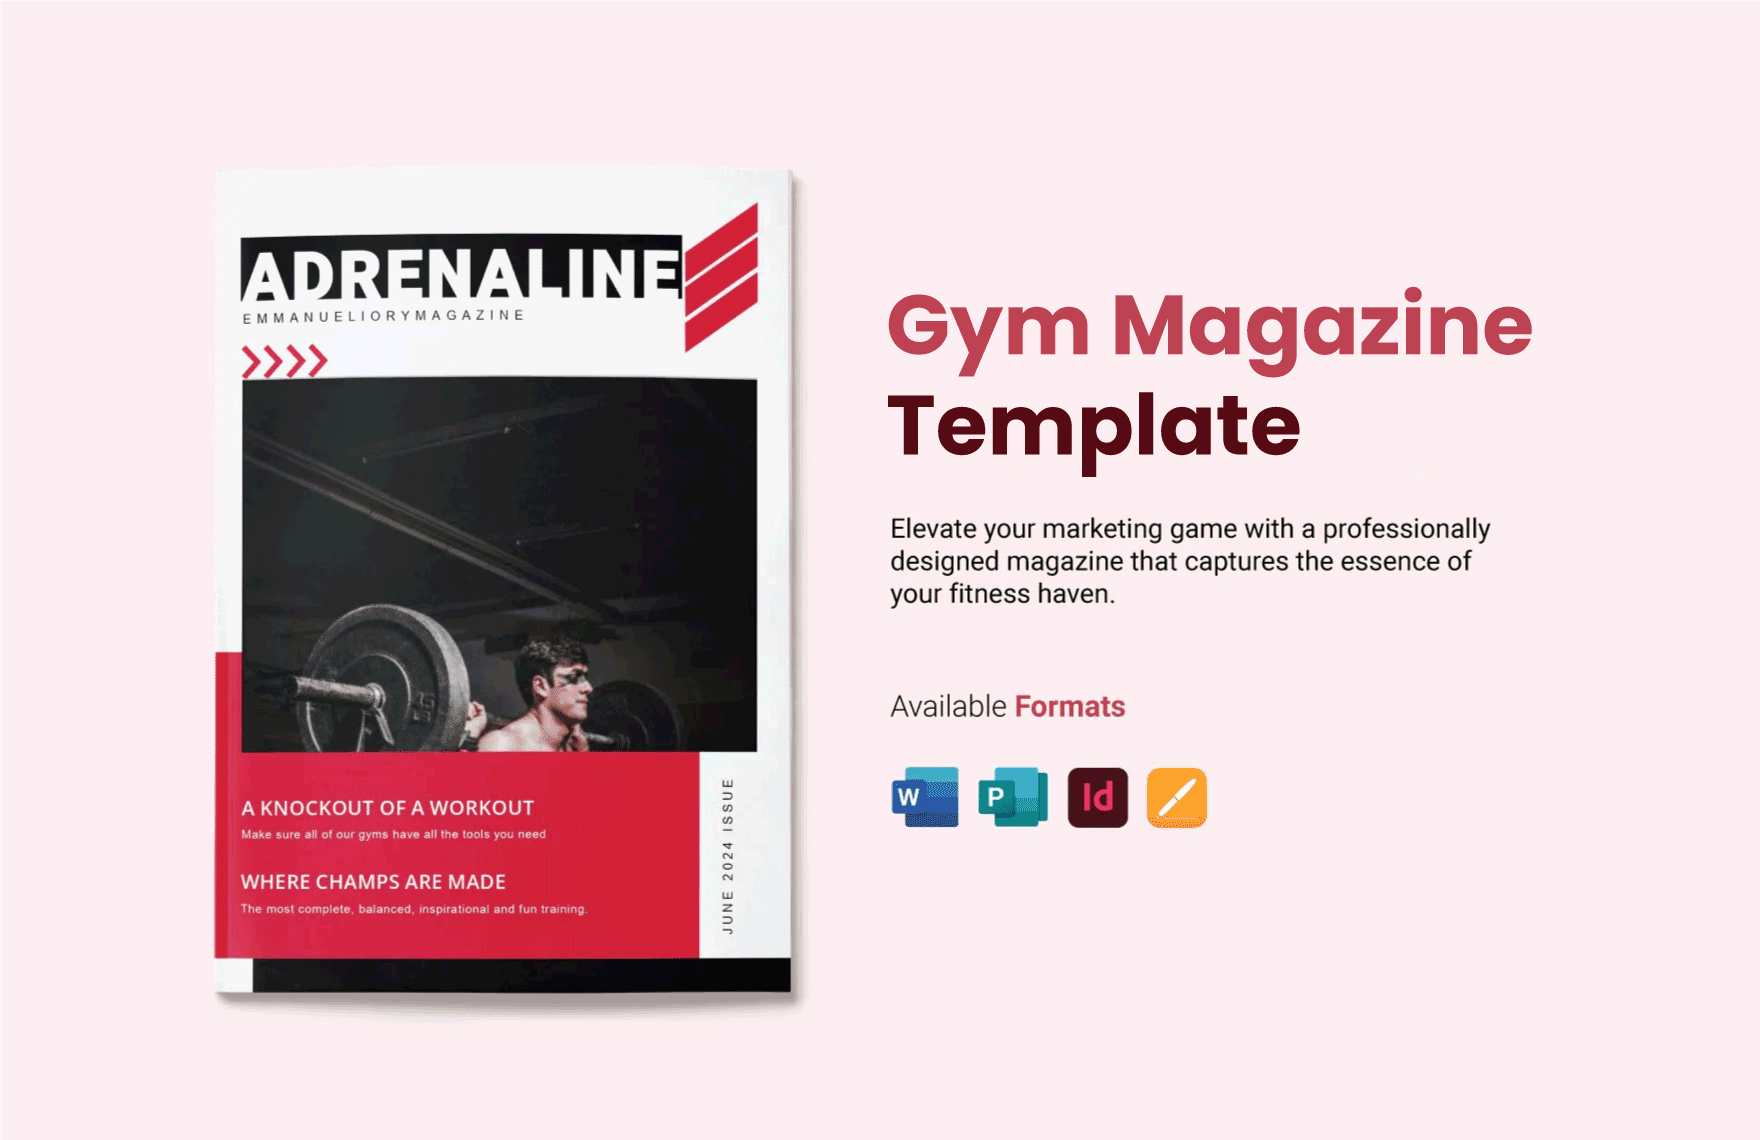 Free Gym Magazine Template in Word, Apple Pages, Publisher, InDesign